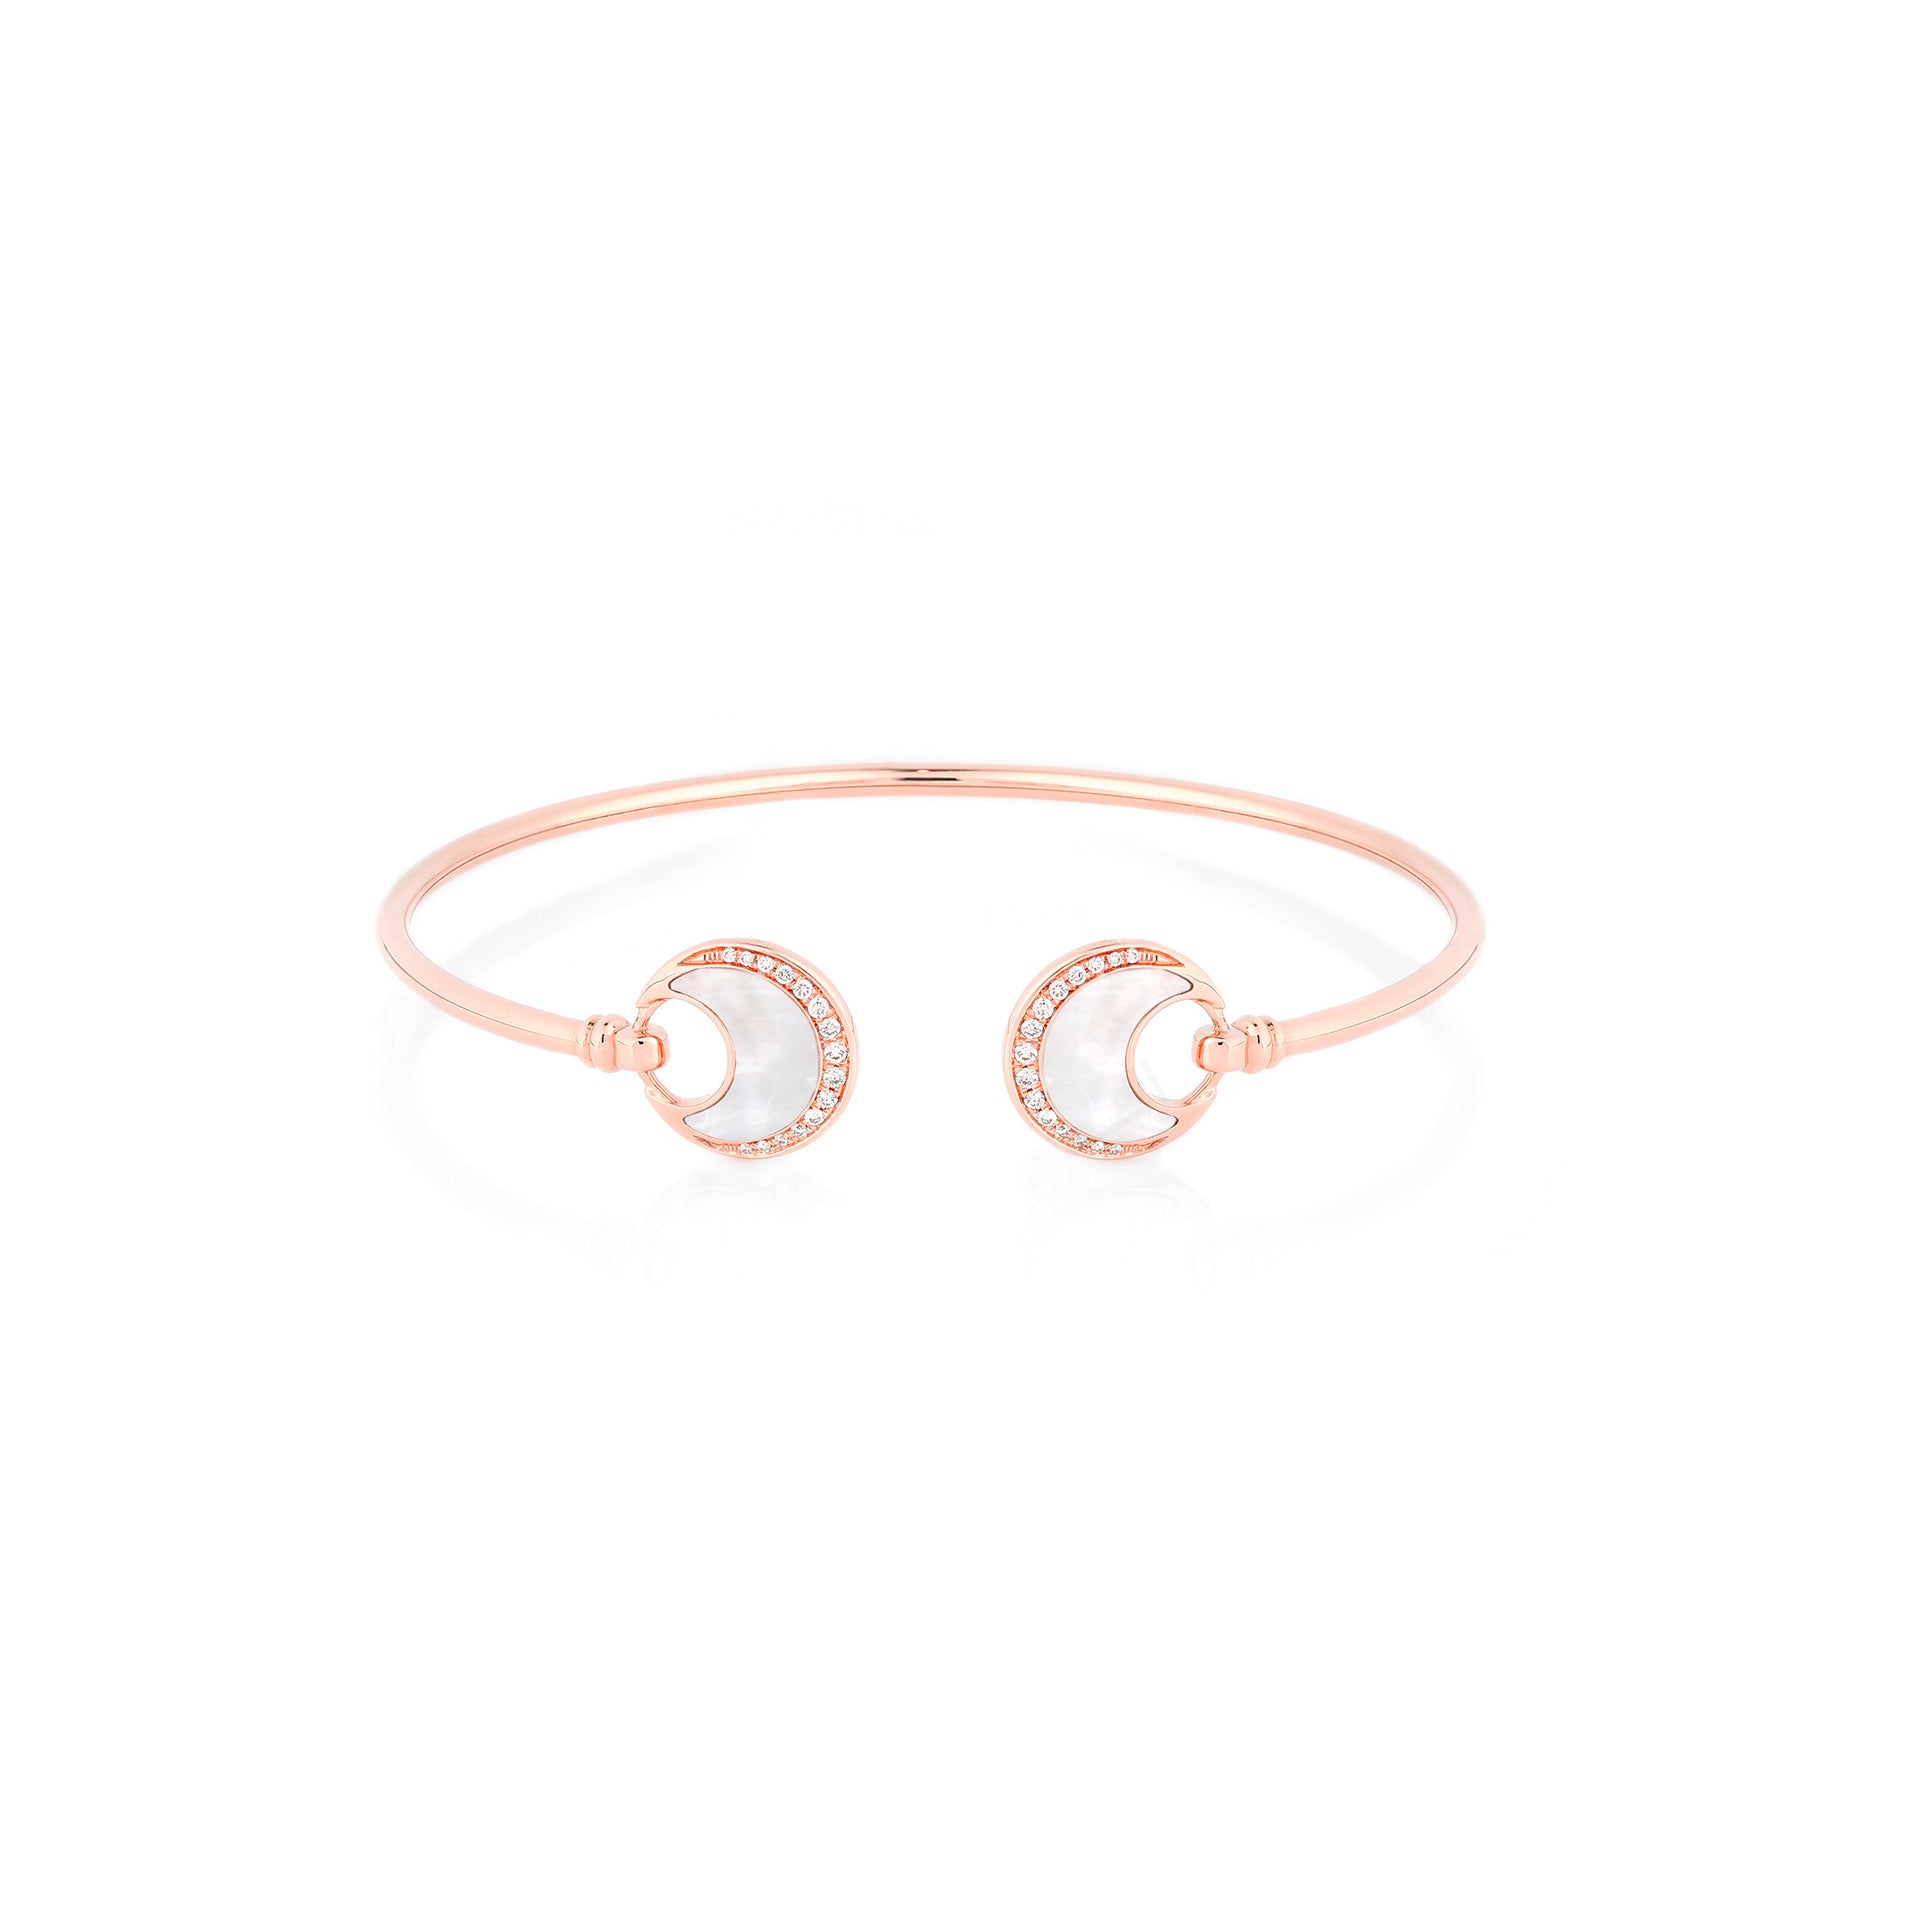 Al Hilal bangle in rose gold with mother of pearl stone and diamonds